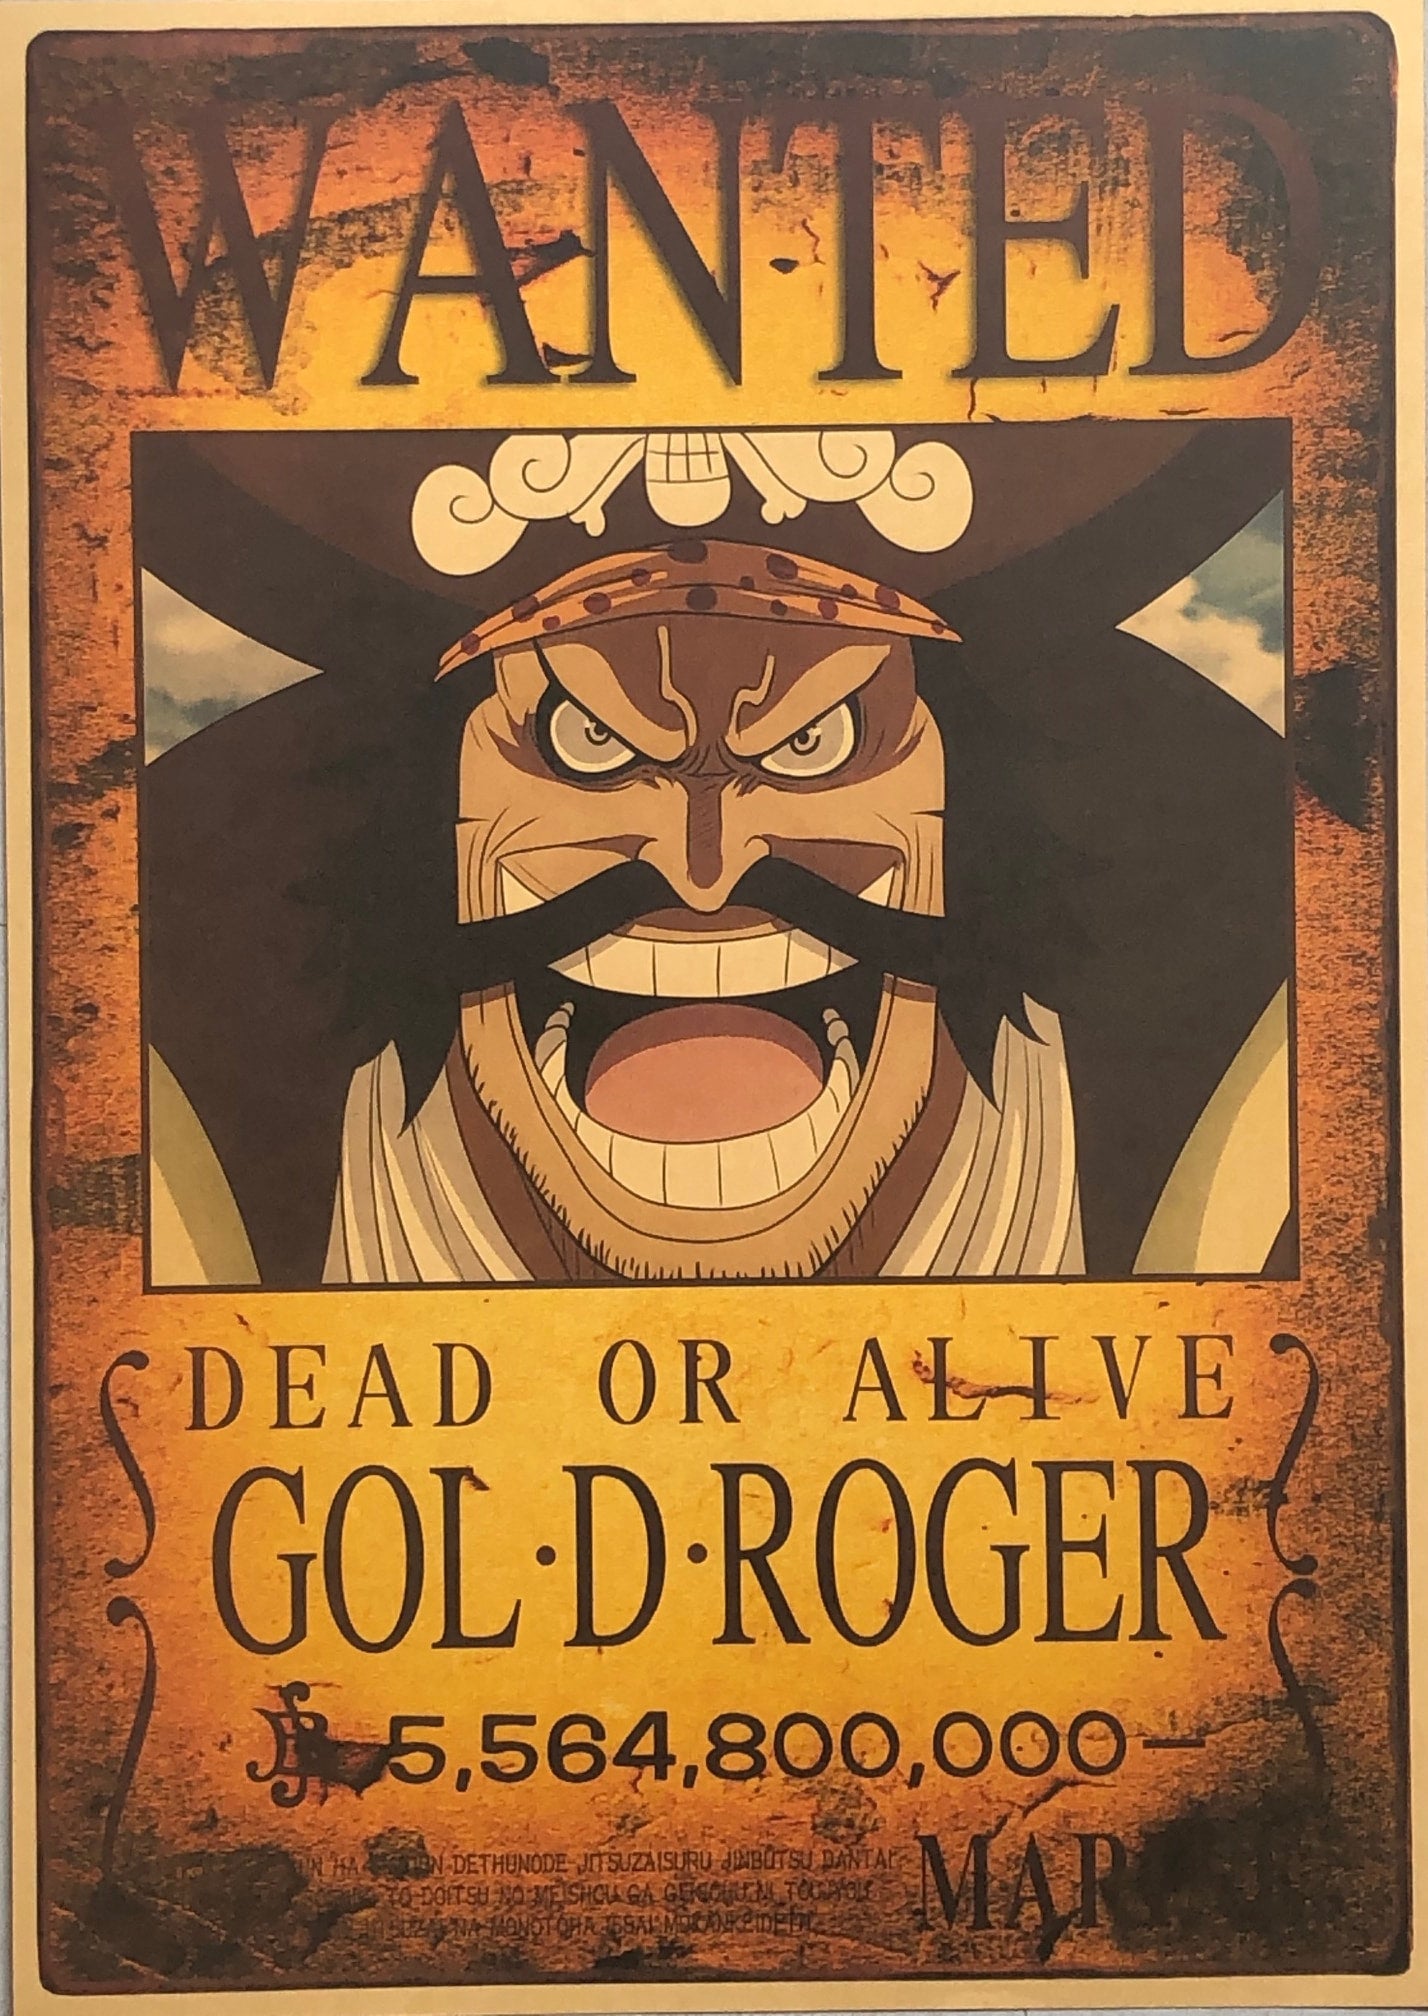 Gold D Roger Wanted poster one piece bounty (2023 updated price ) | Poster